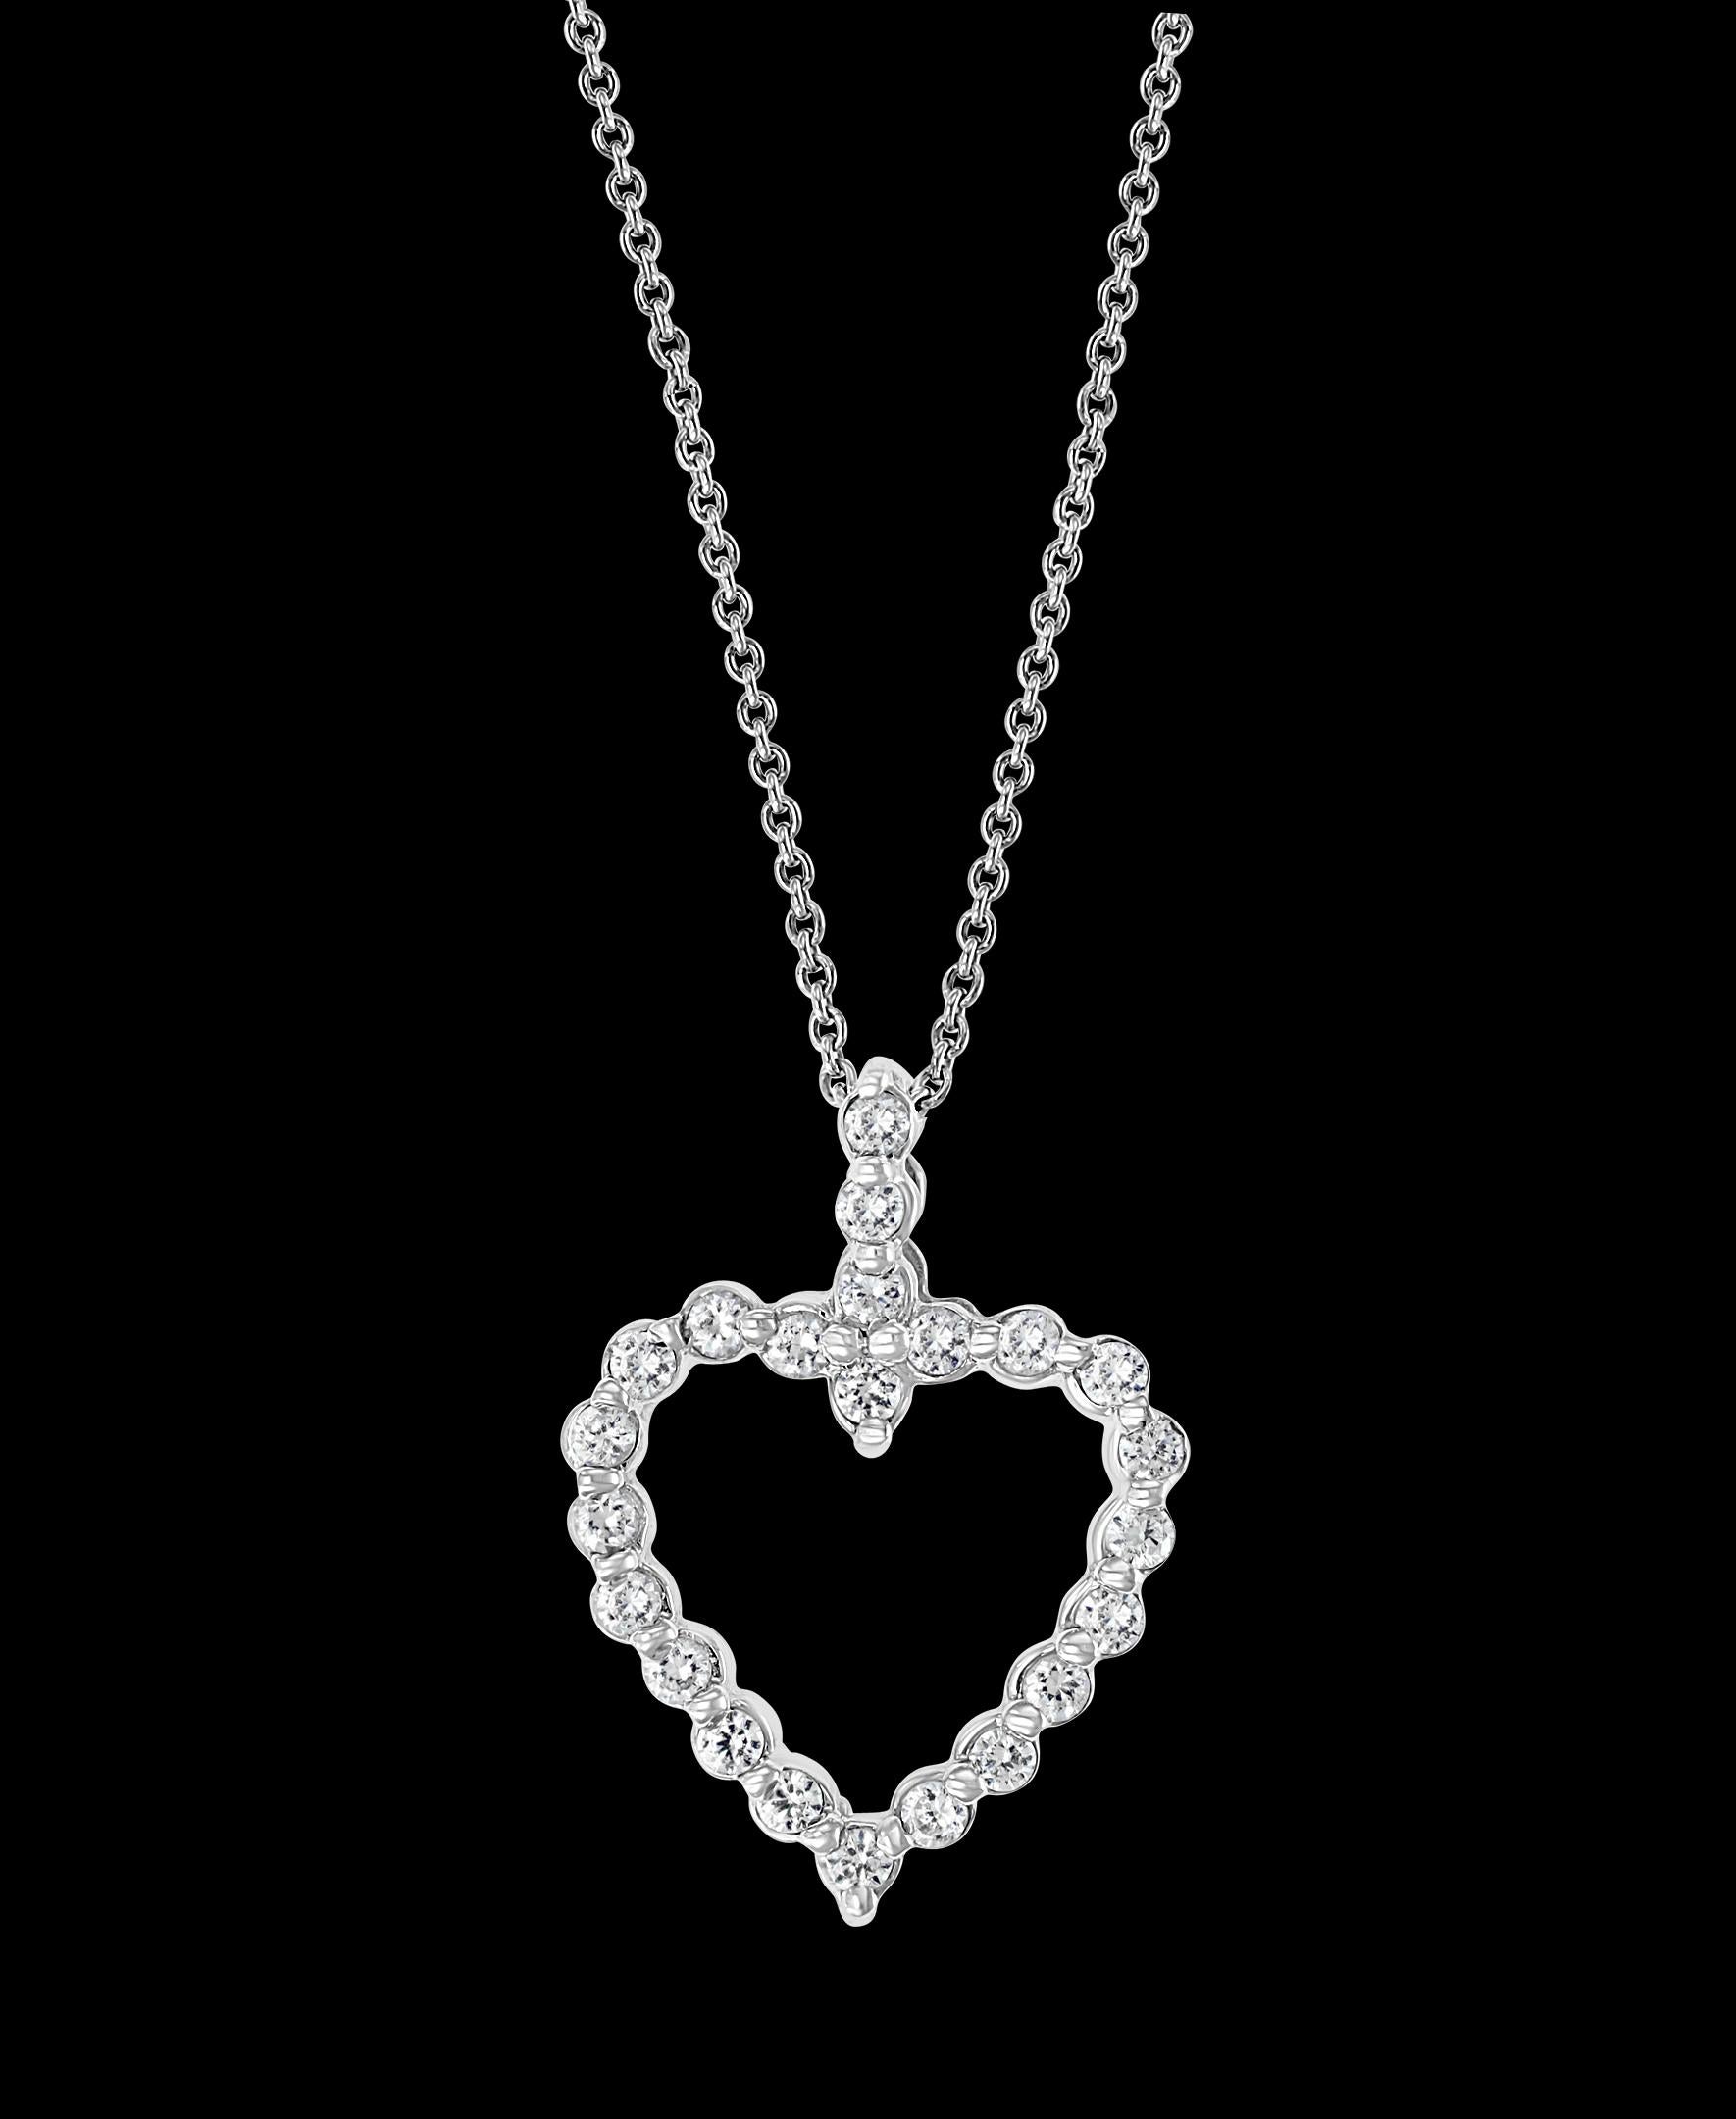 Approximately 1 Ct Diamond  Heart Pendant/ Necklace 14 Karat White Gold with Chain

Diamond Weight  approximately 1.0 Carats
Diamonds are Eye clean quality with lots of shine and brilliance!

14 K gold Weight  4.5 Grams
Very affordable price for